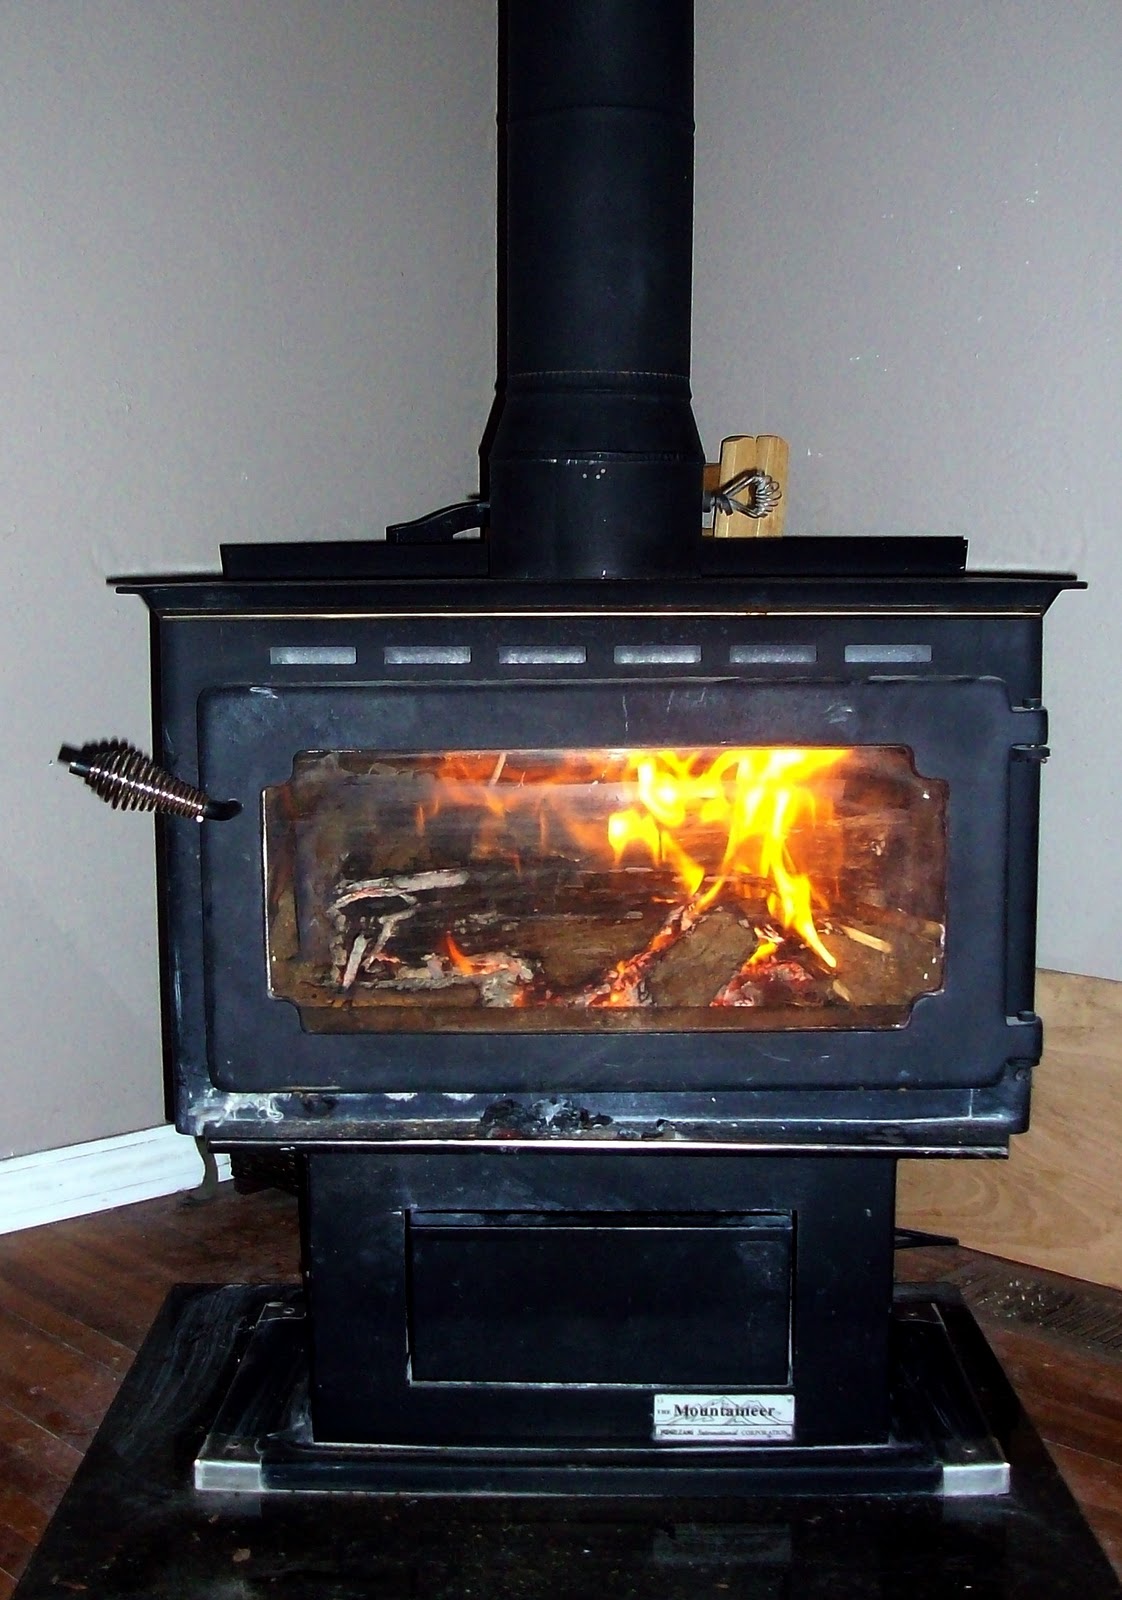 Roots  Firewood Preparing For Winter And The Wood Burning Stove